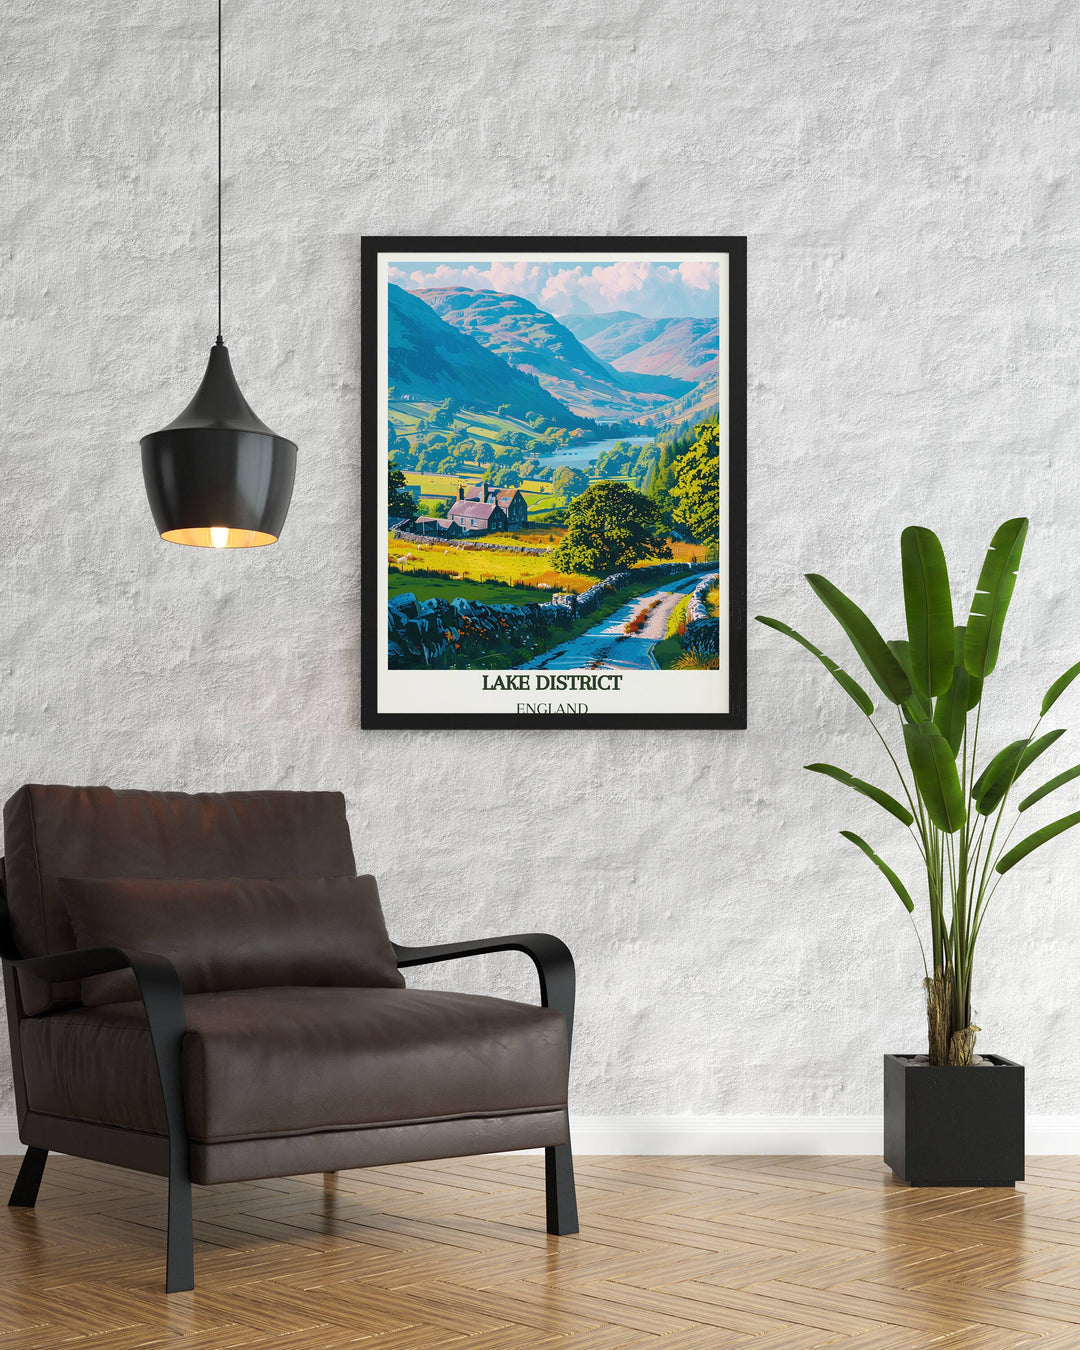 Charming England Home Decor featuring a captivating Lake District Print, adding warmth and character to your living space